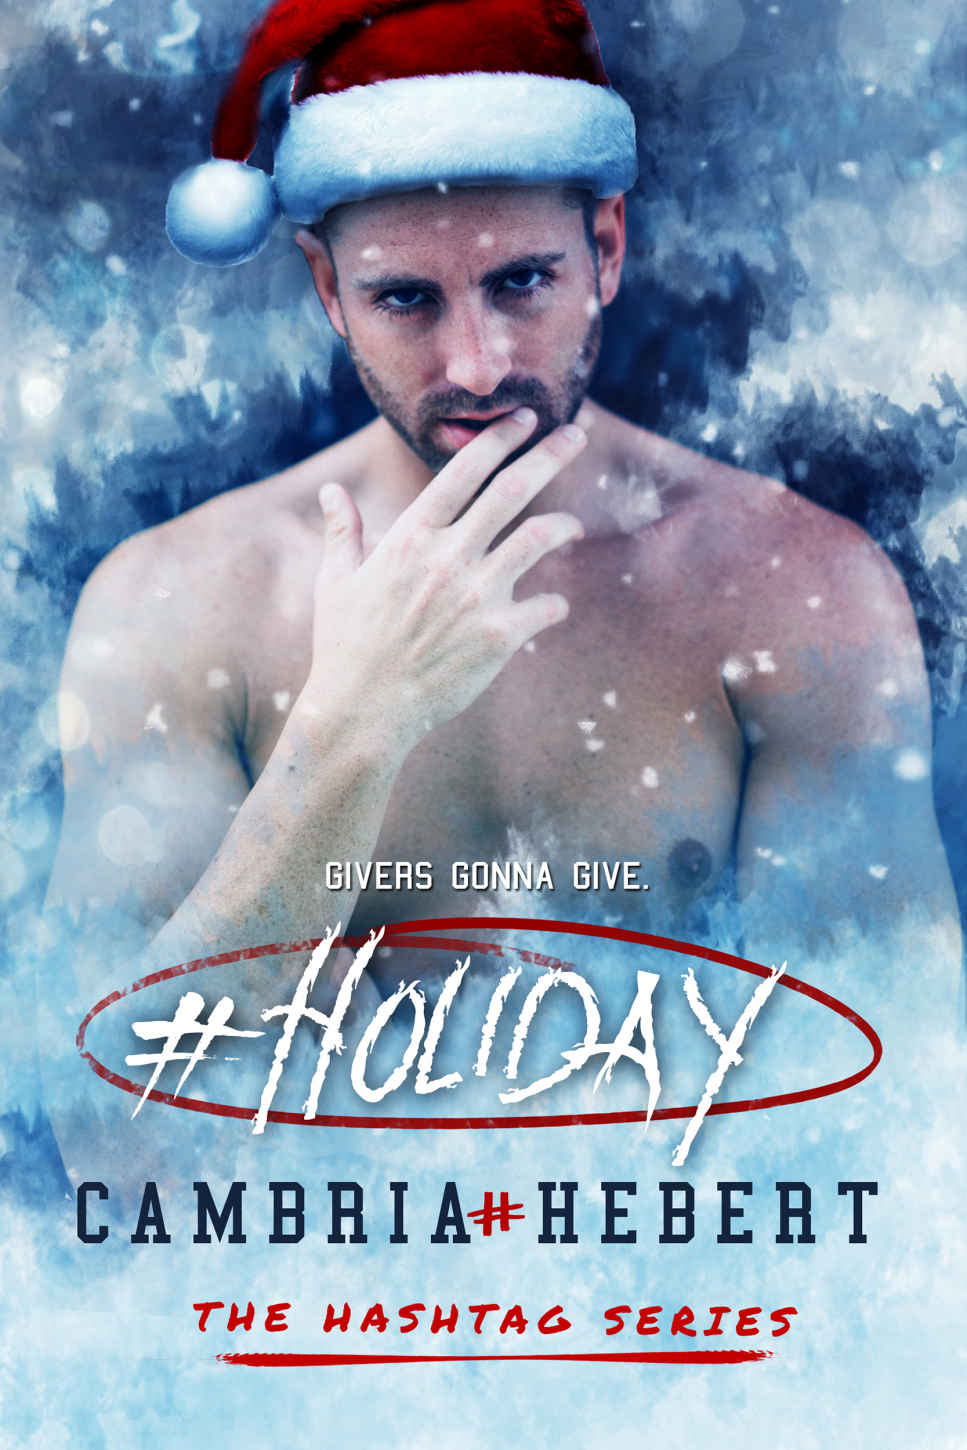 #Holiday: A Hashtag Series Short Story (Hashtag #6.5) by Cambria Hebert